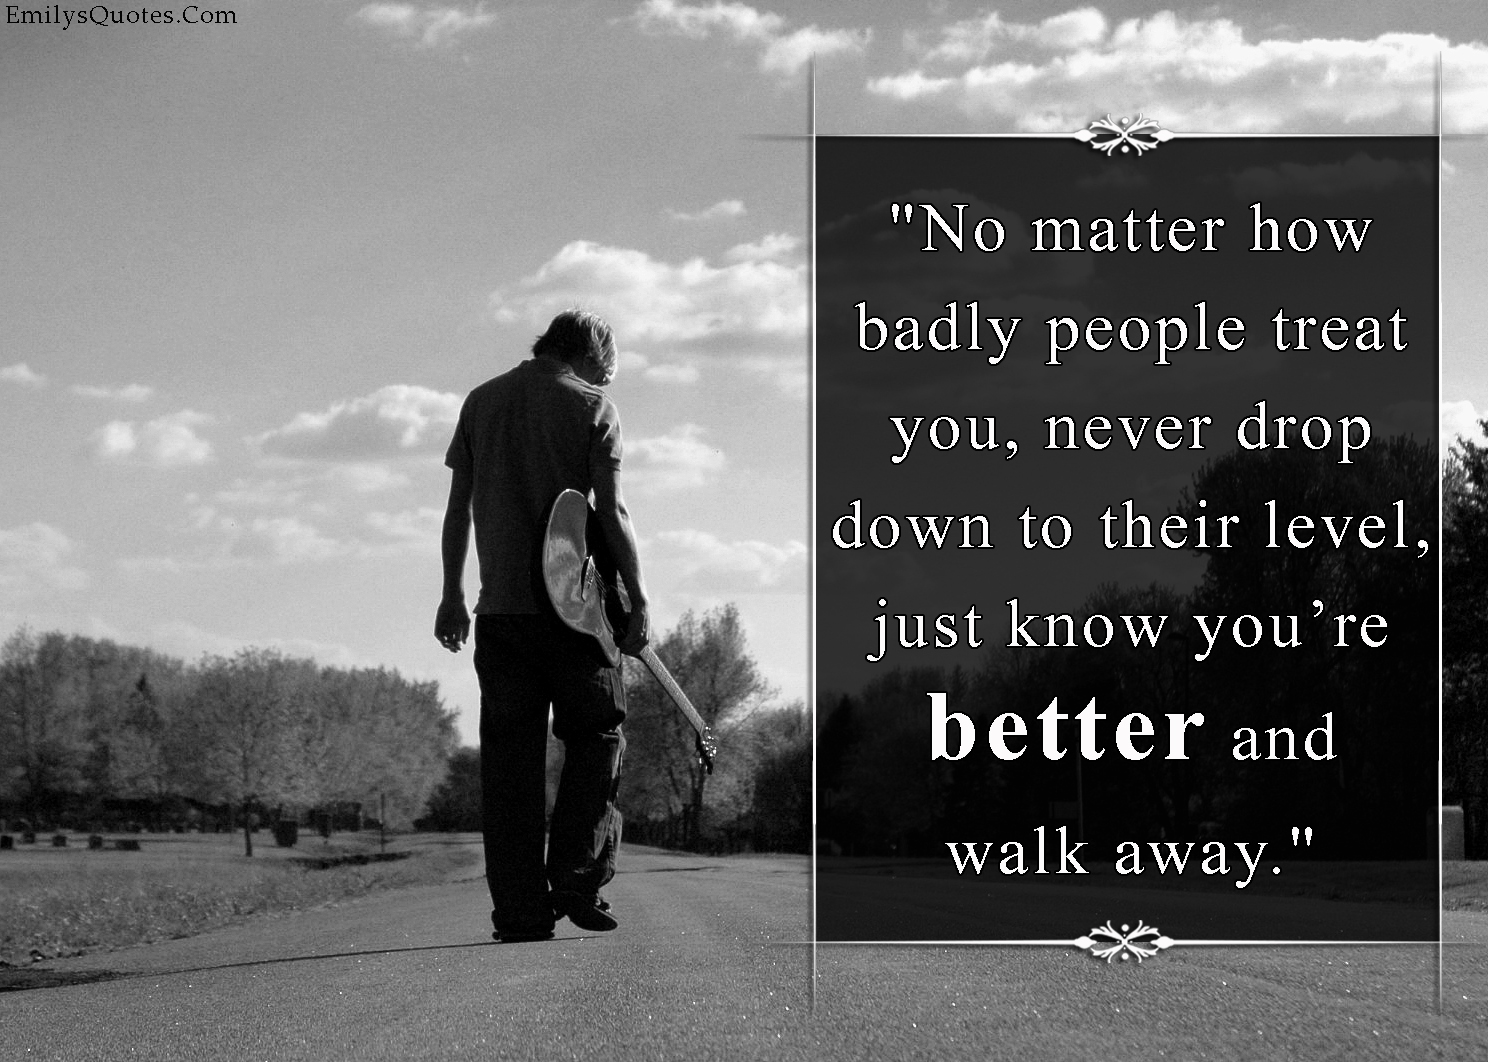 EmilysQuotes.Com - people, treat, badly, better, walk away, unknown, relationship